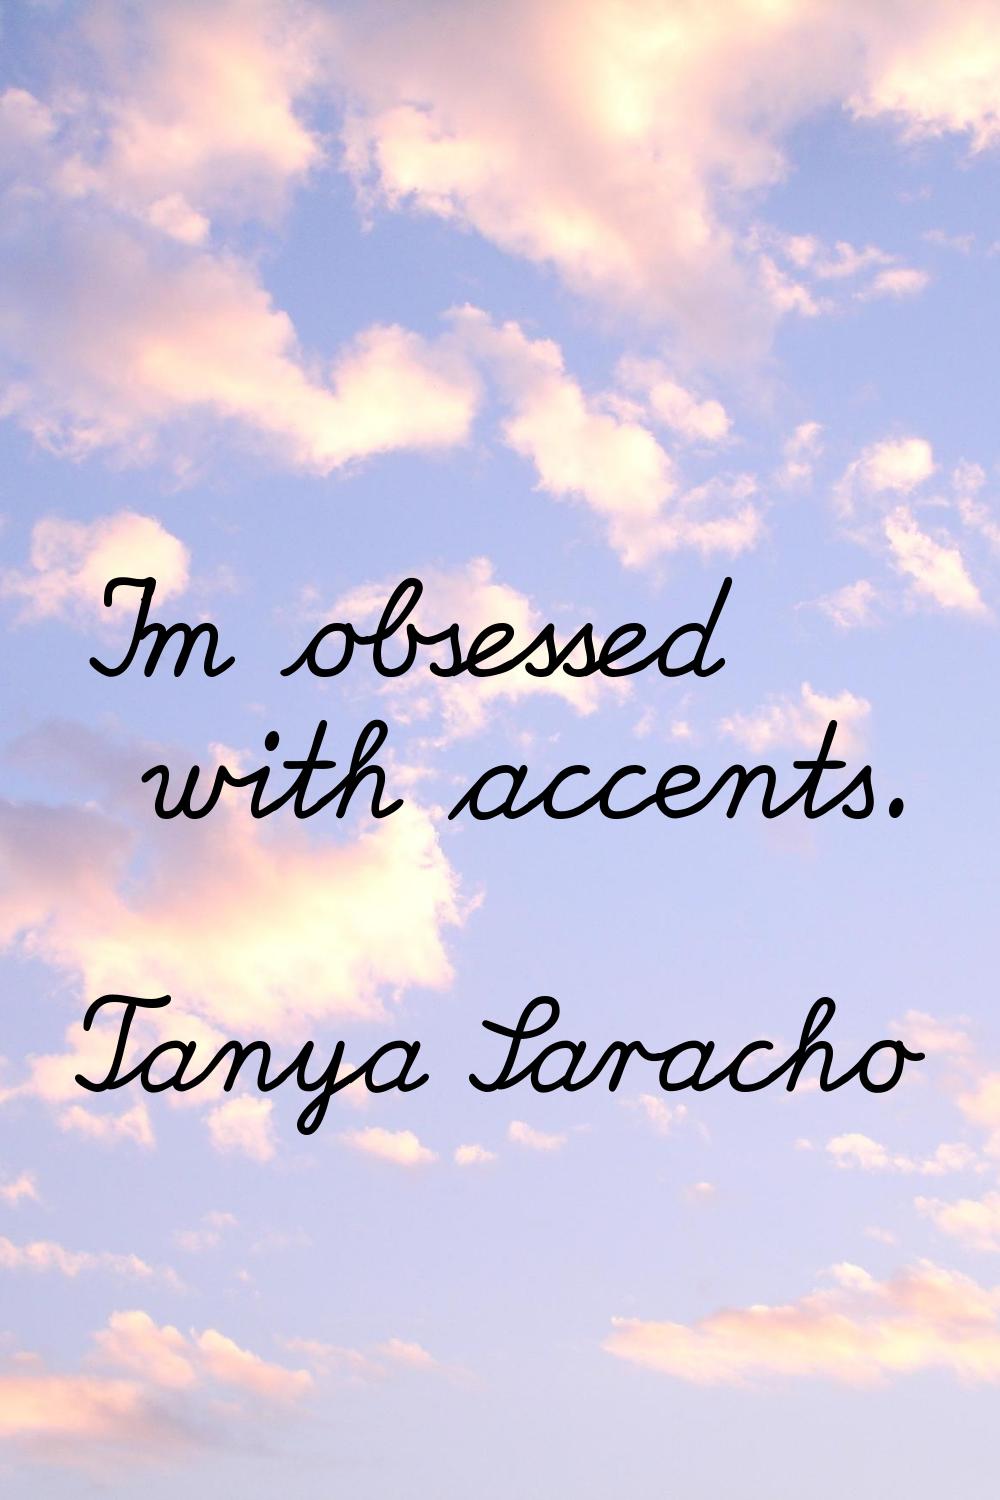 I'm obsessed with accents.